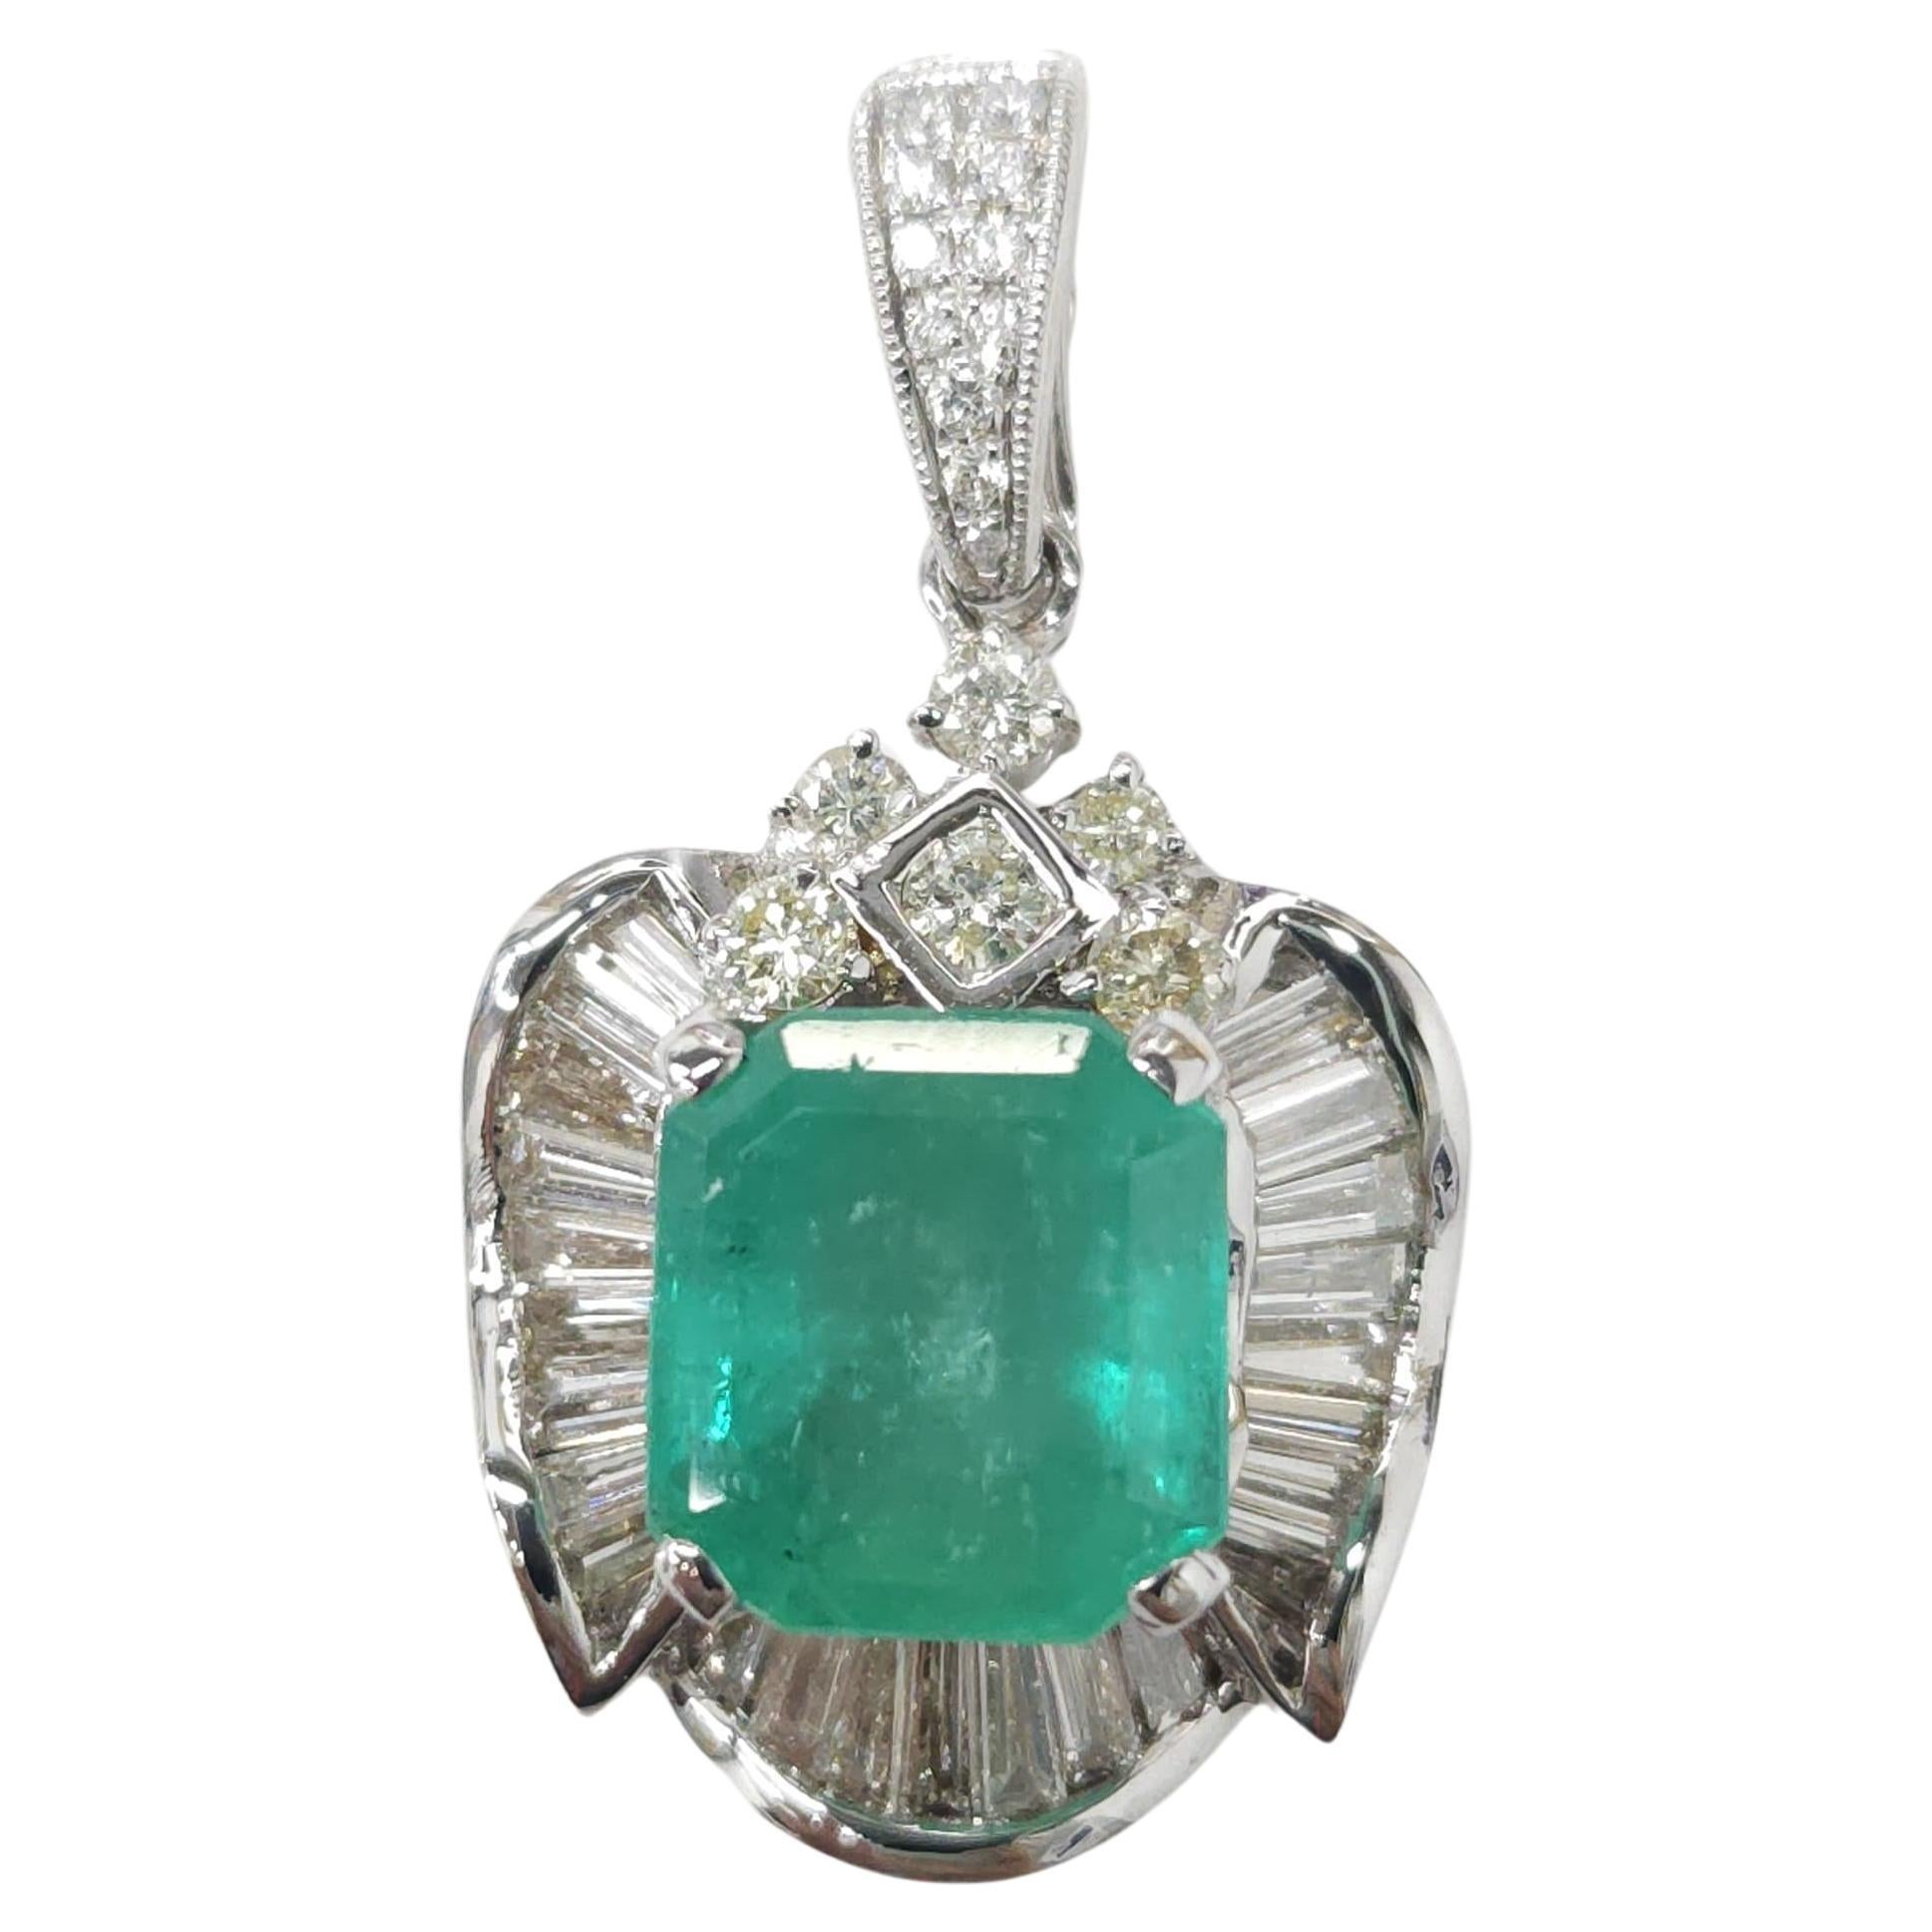 IGI Certified 3.97 Carat Colombian Emerald & Diamond Pendent in 18K White Gold For Sale